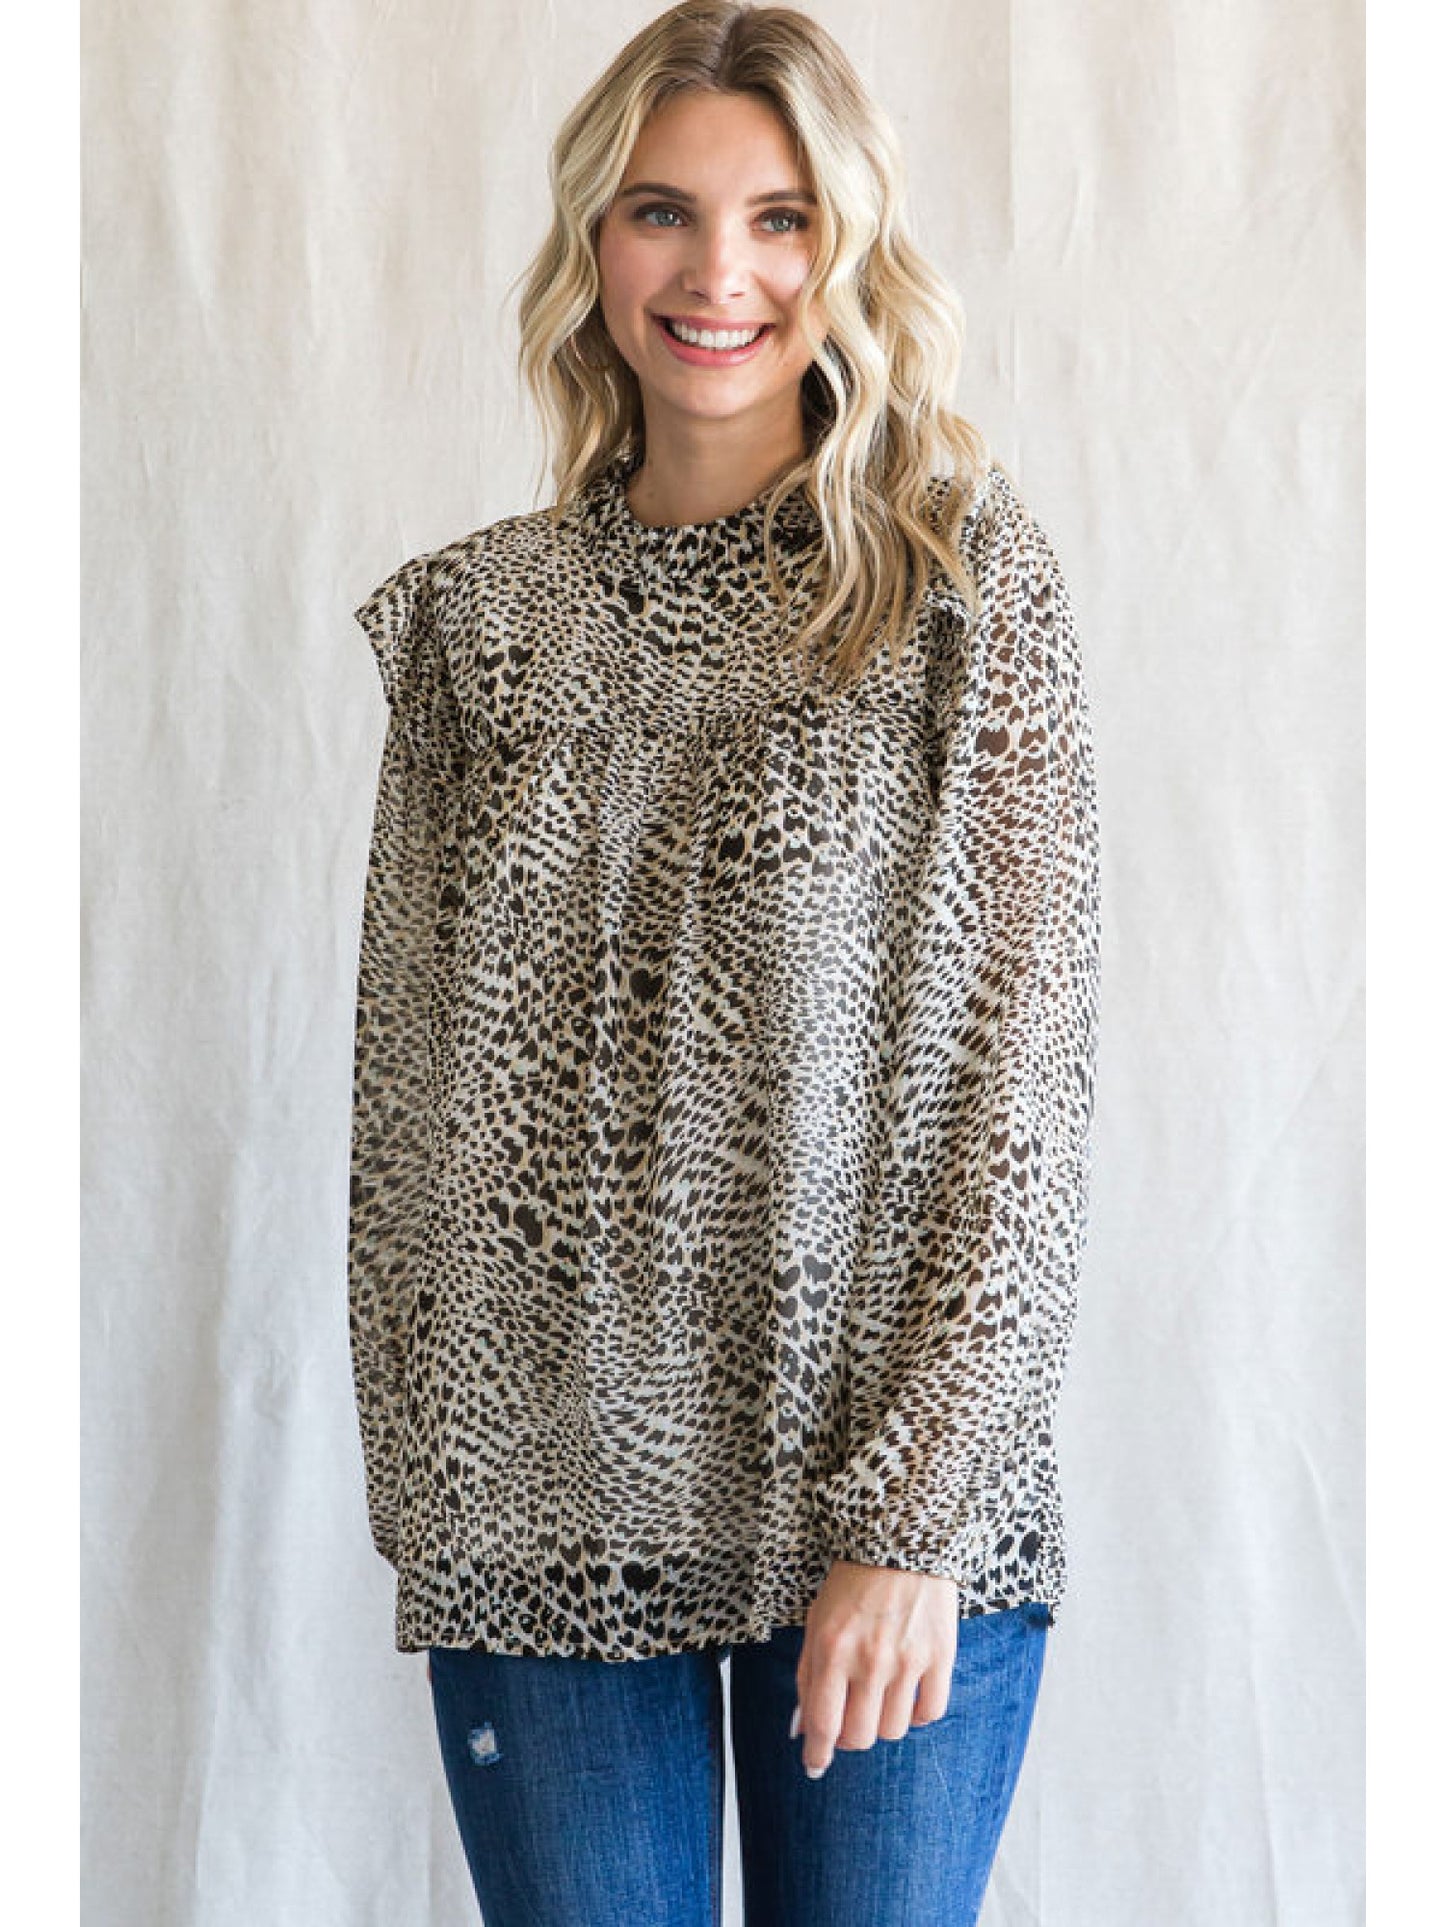 The Cindy mint/taupe leopard top